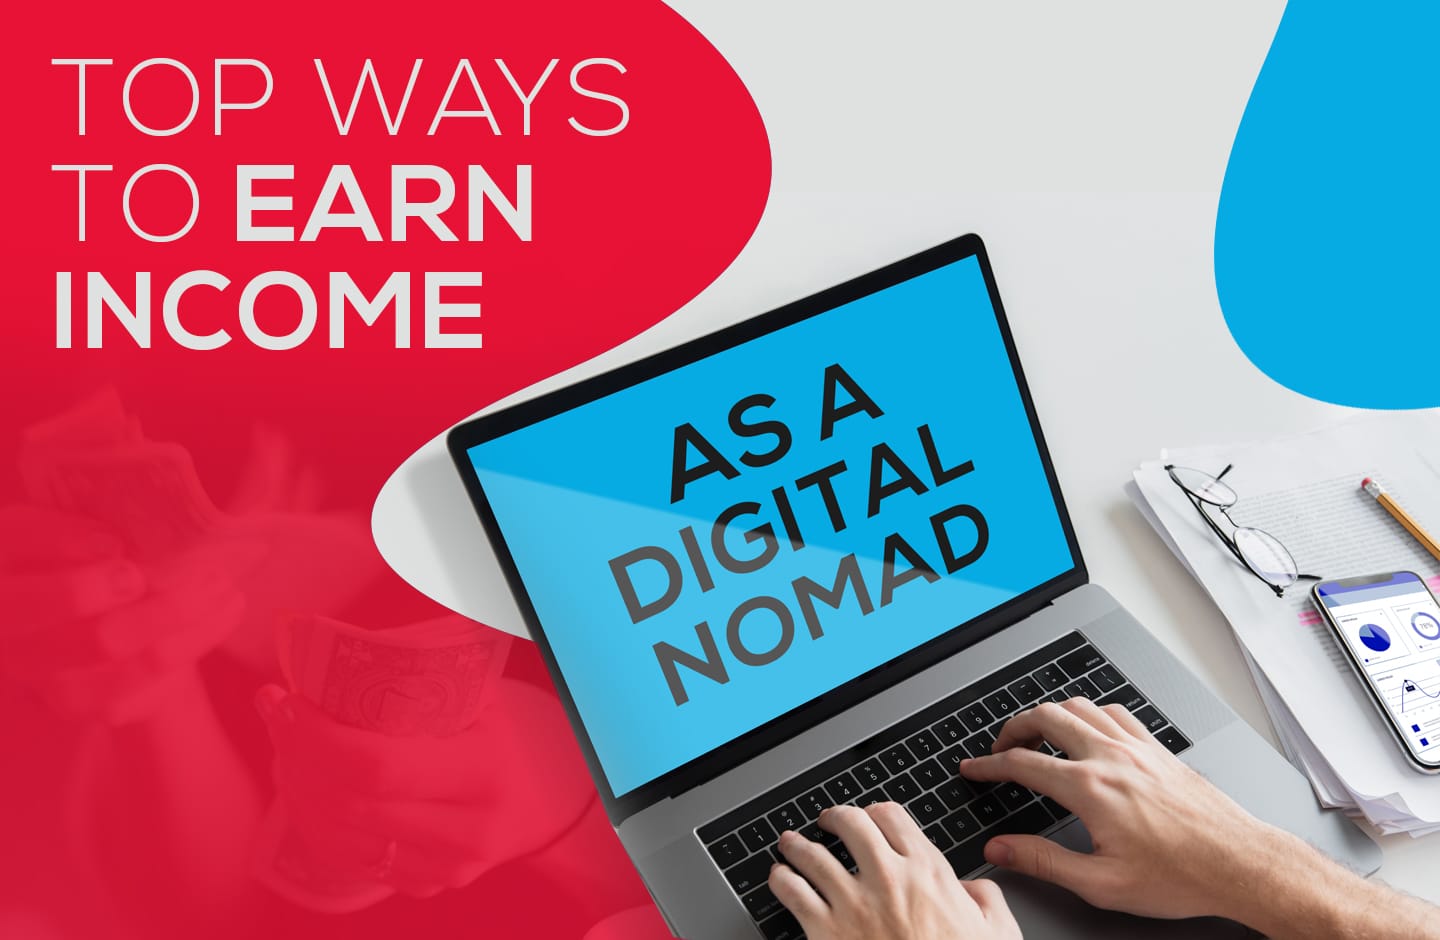 Earn income as a Digital Nomad